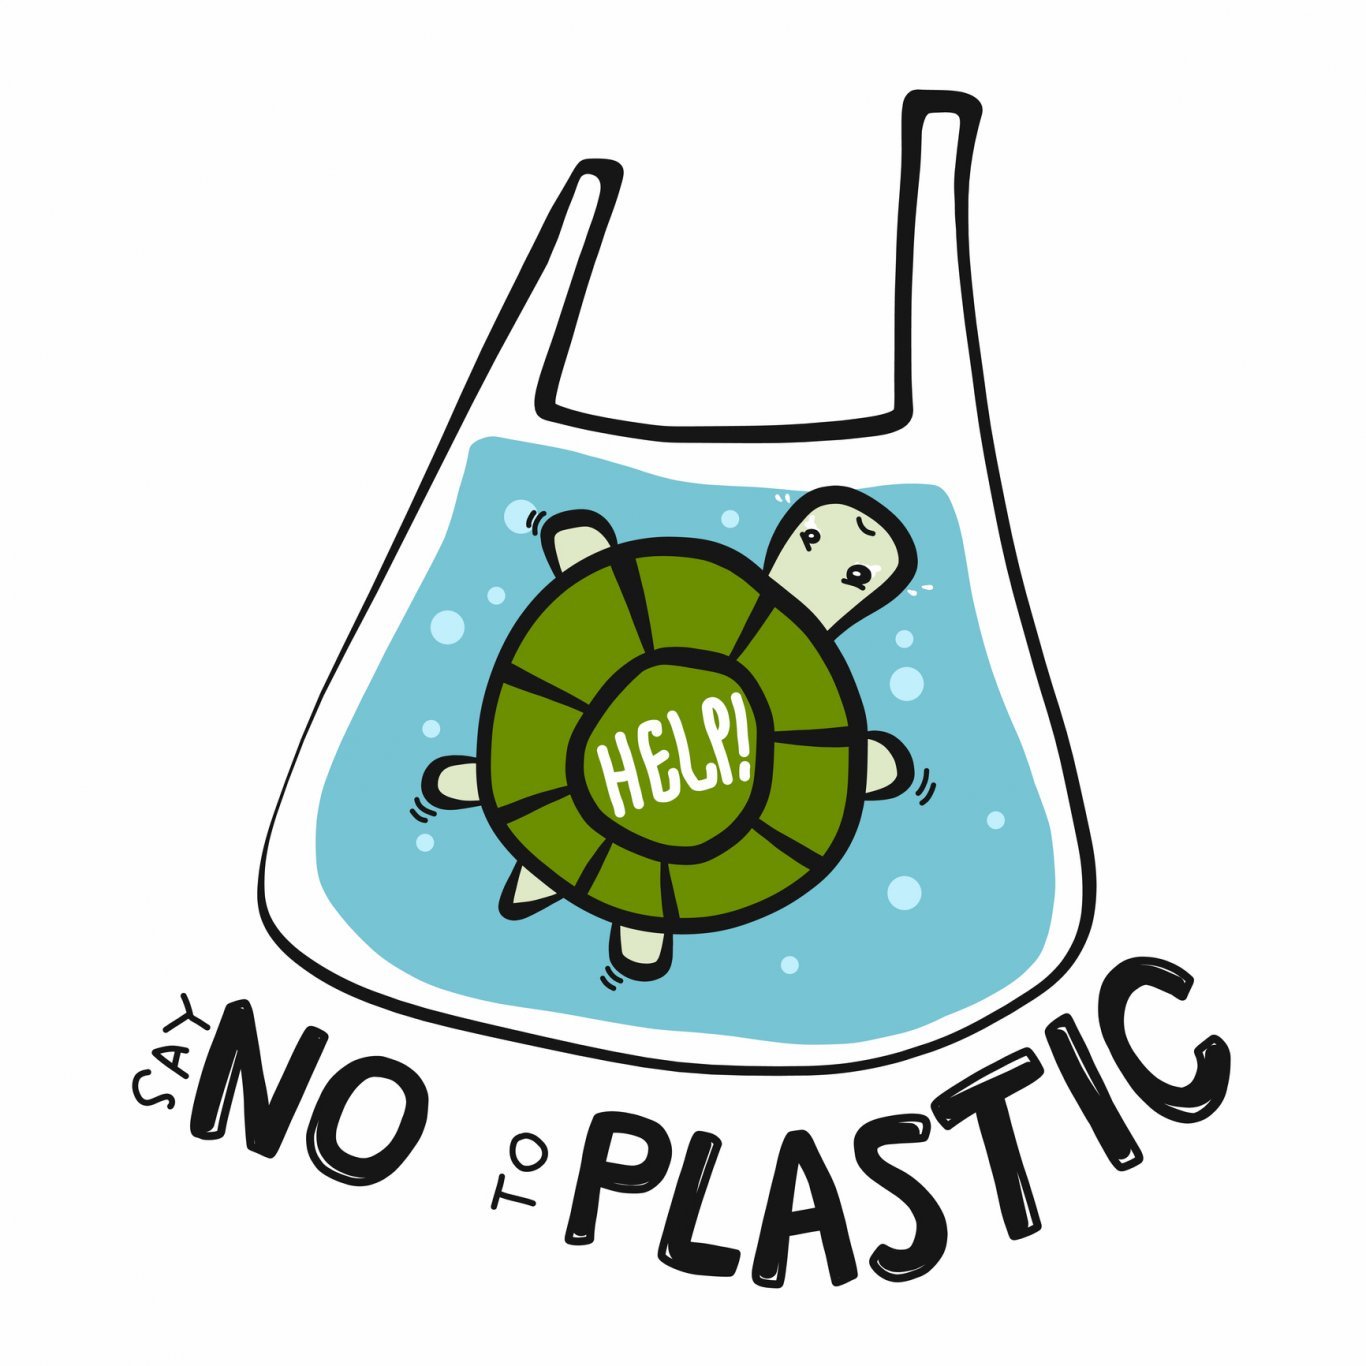 Say no to plastic - graphic